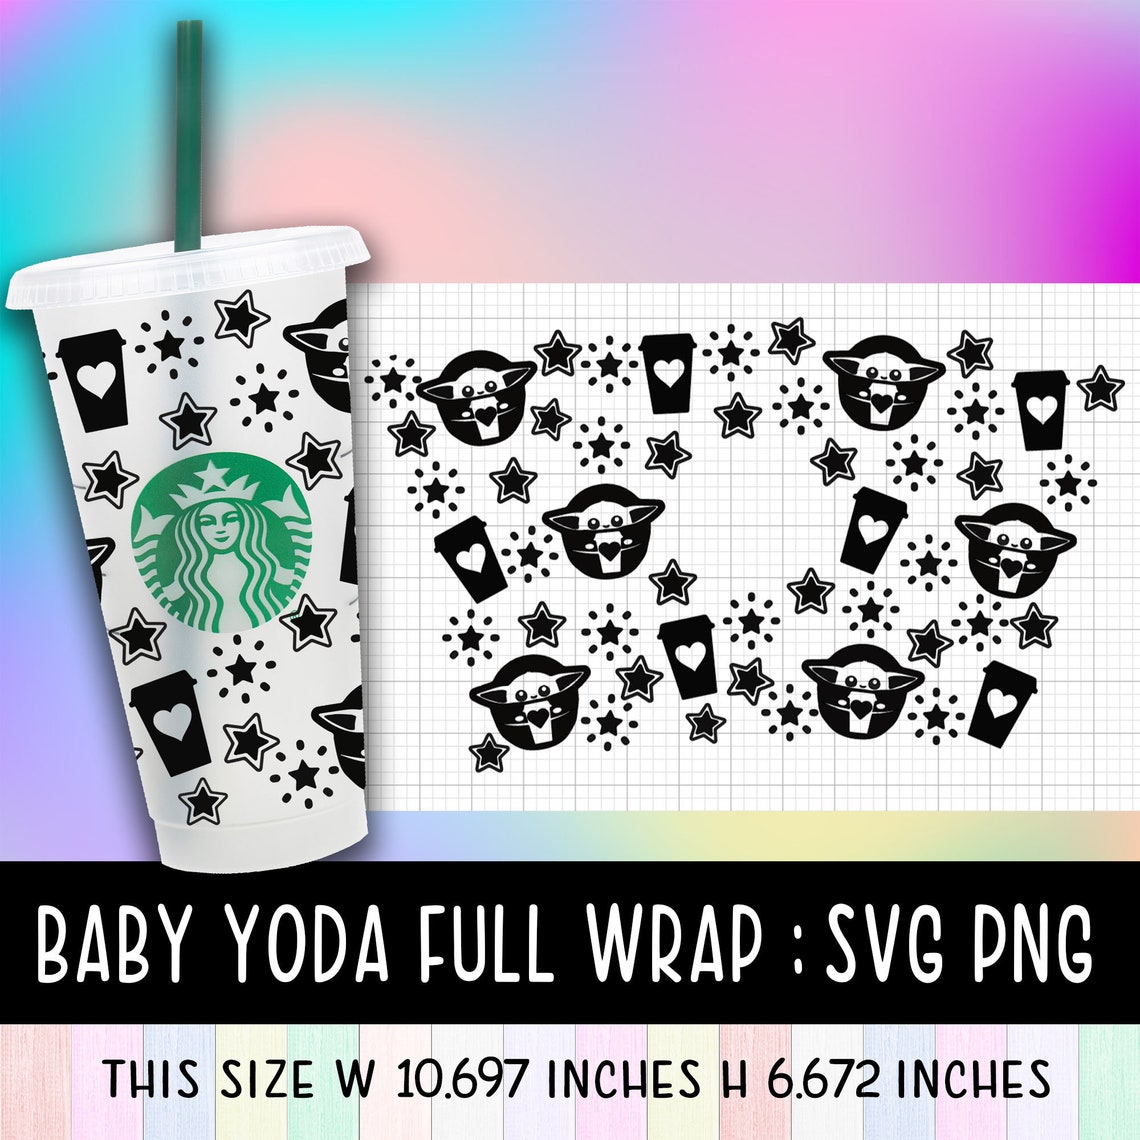 Full Wrap Starbucks Baby Yoda Cold Cup Svg Dyi Venti Cup Etsy